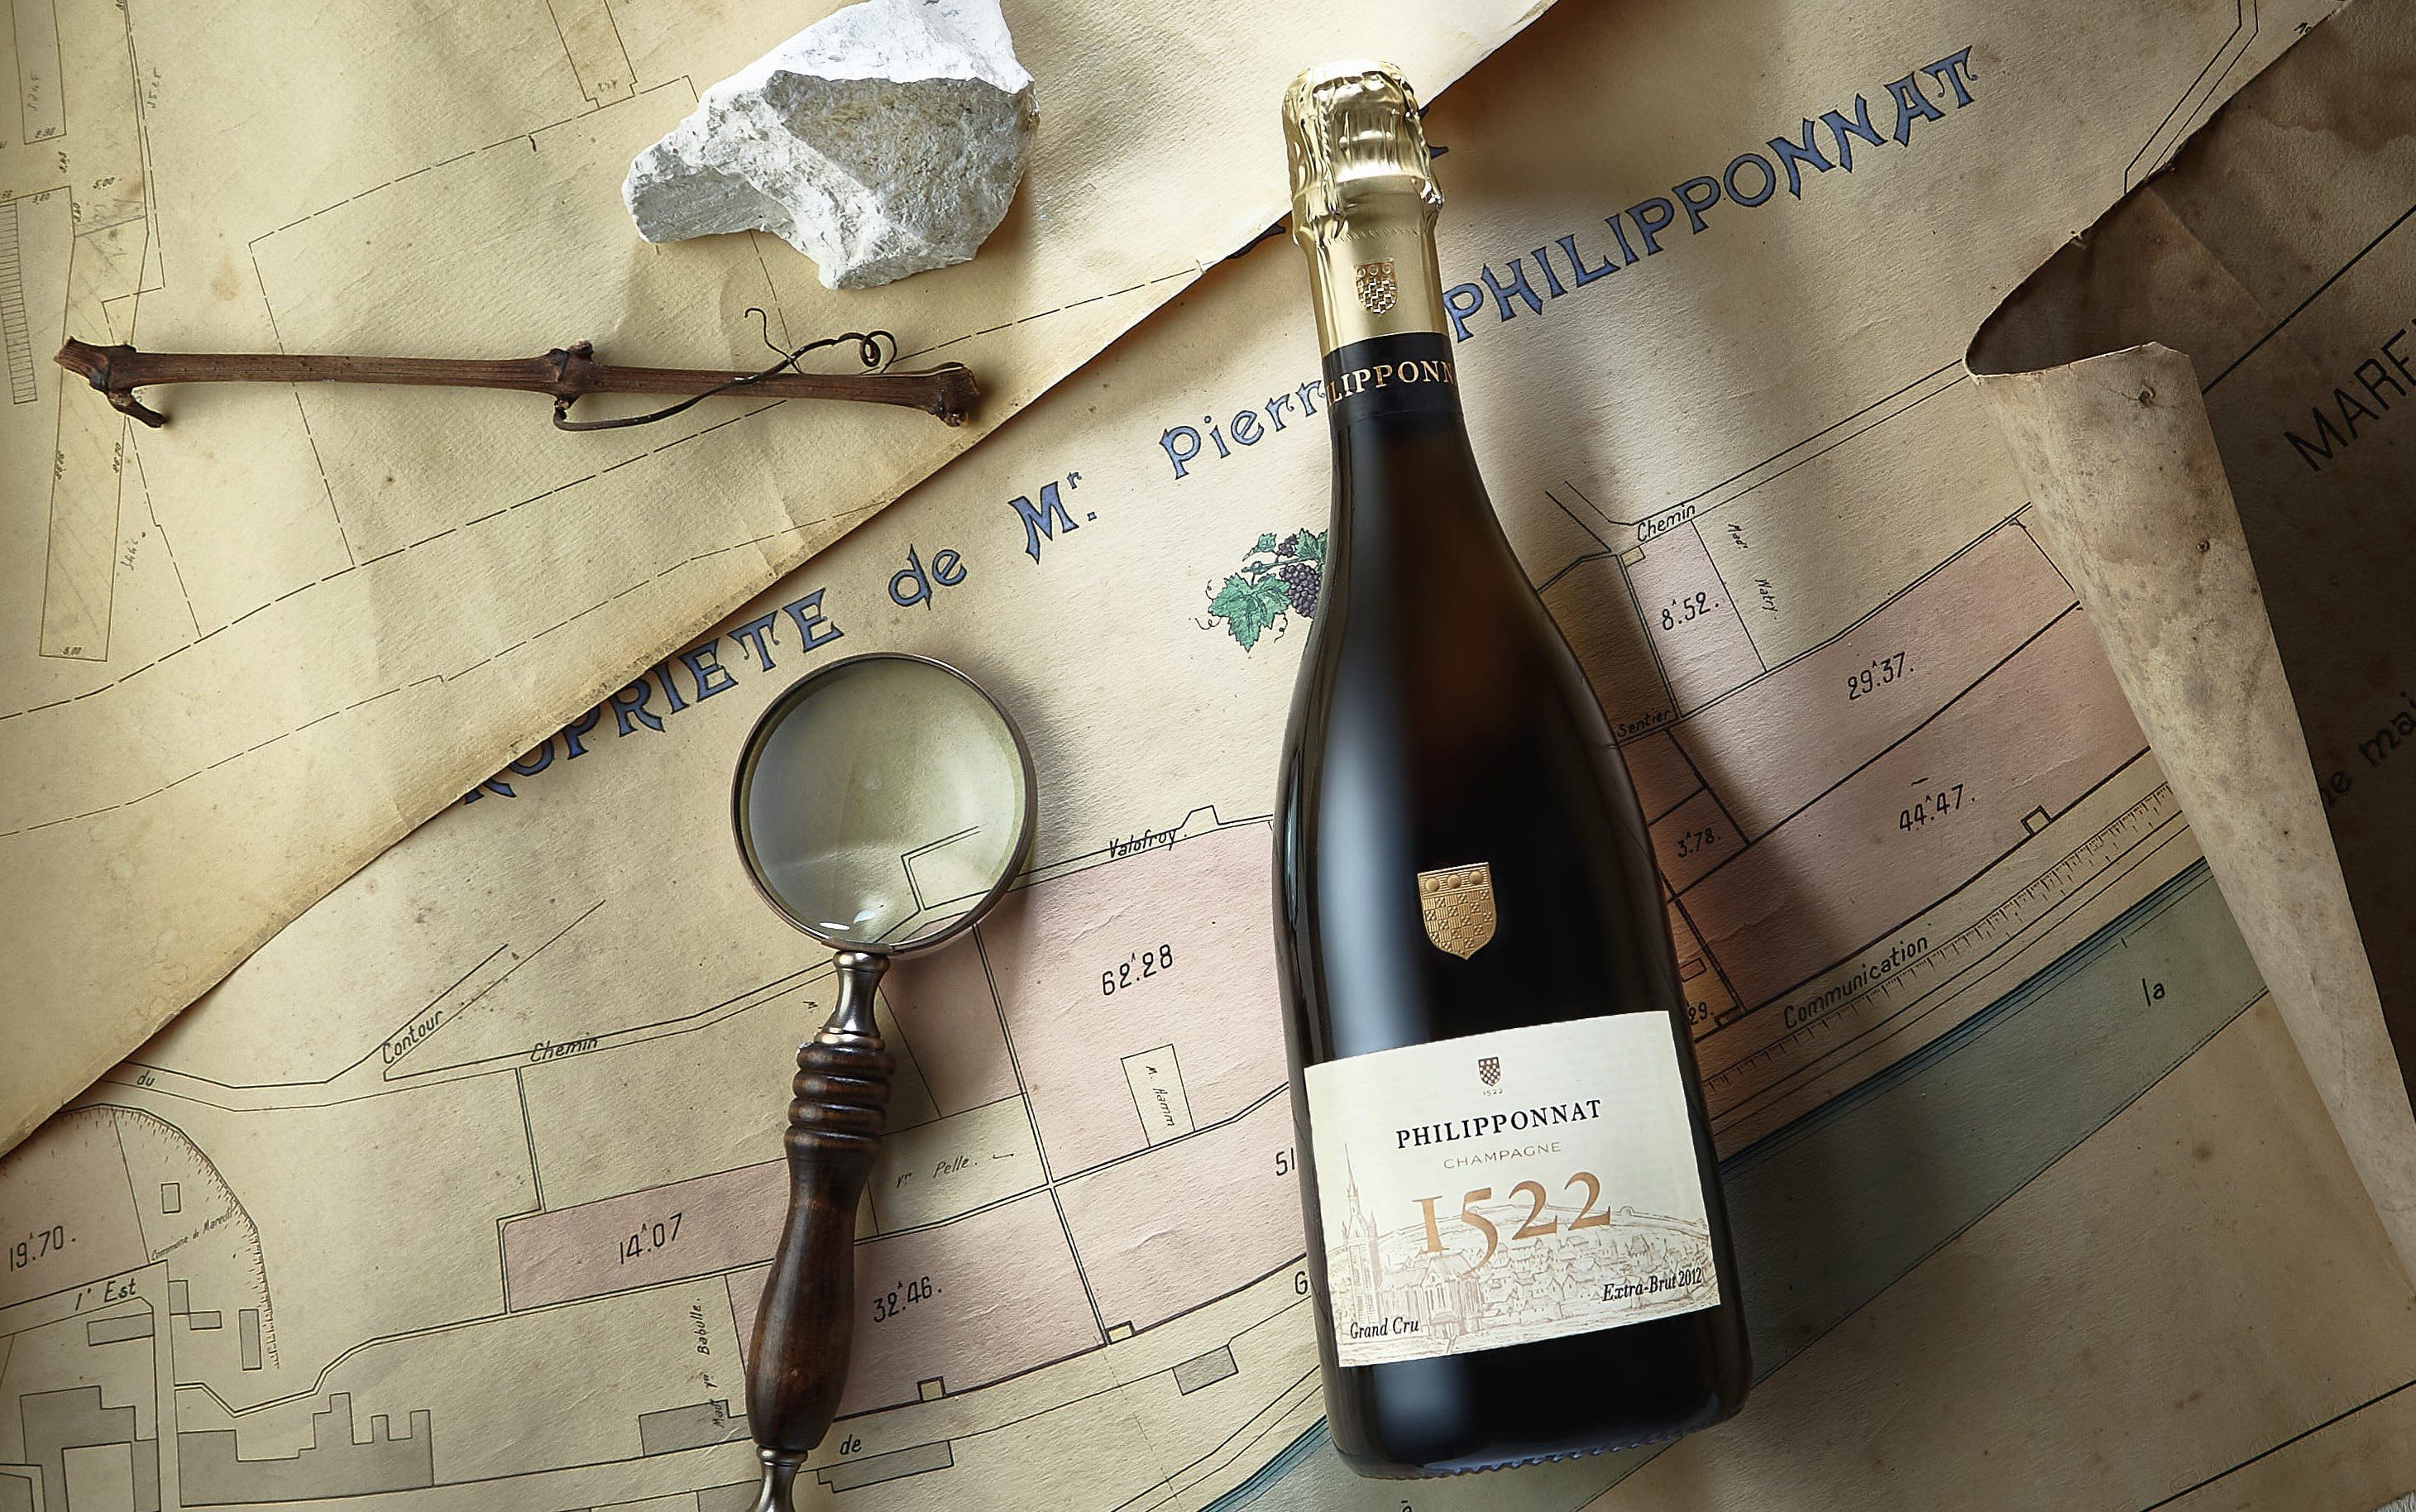 500 years of history - Champagne Philipponnat